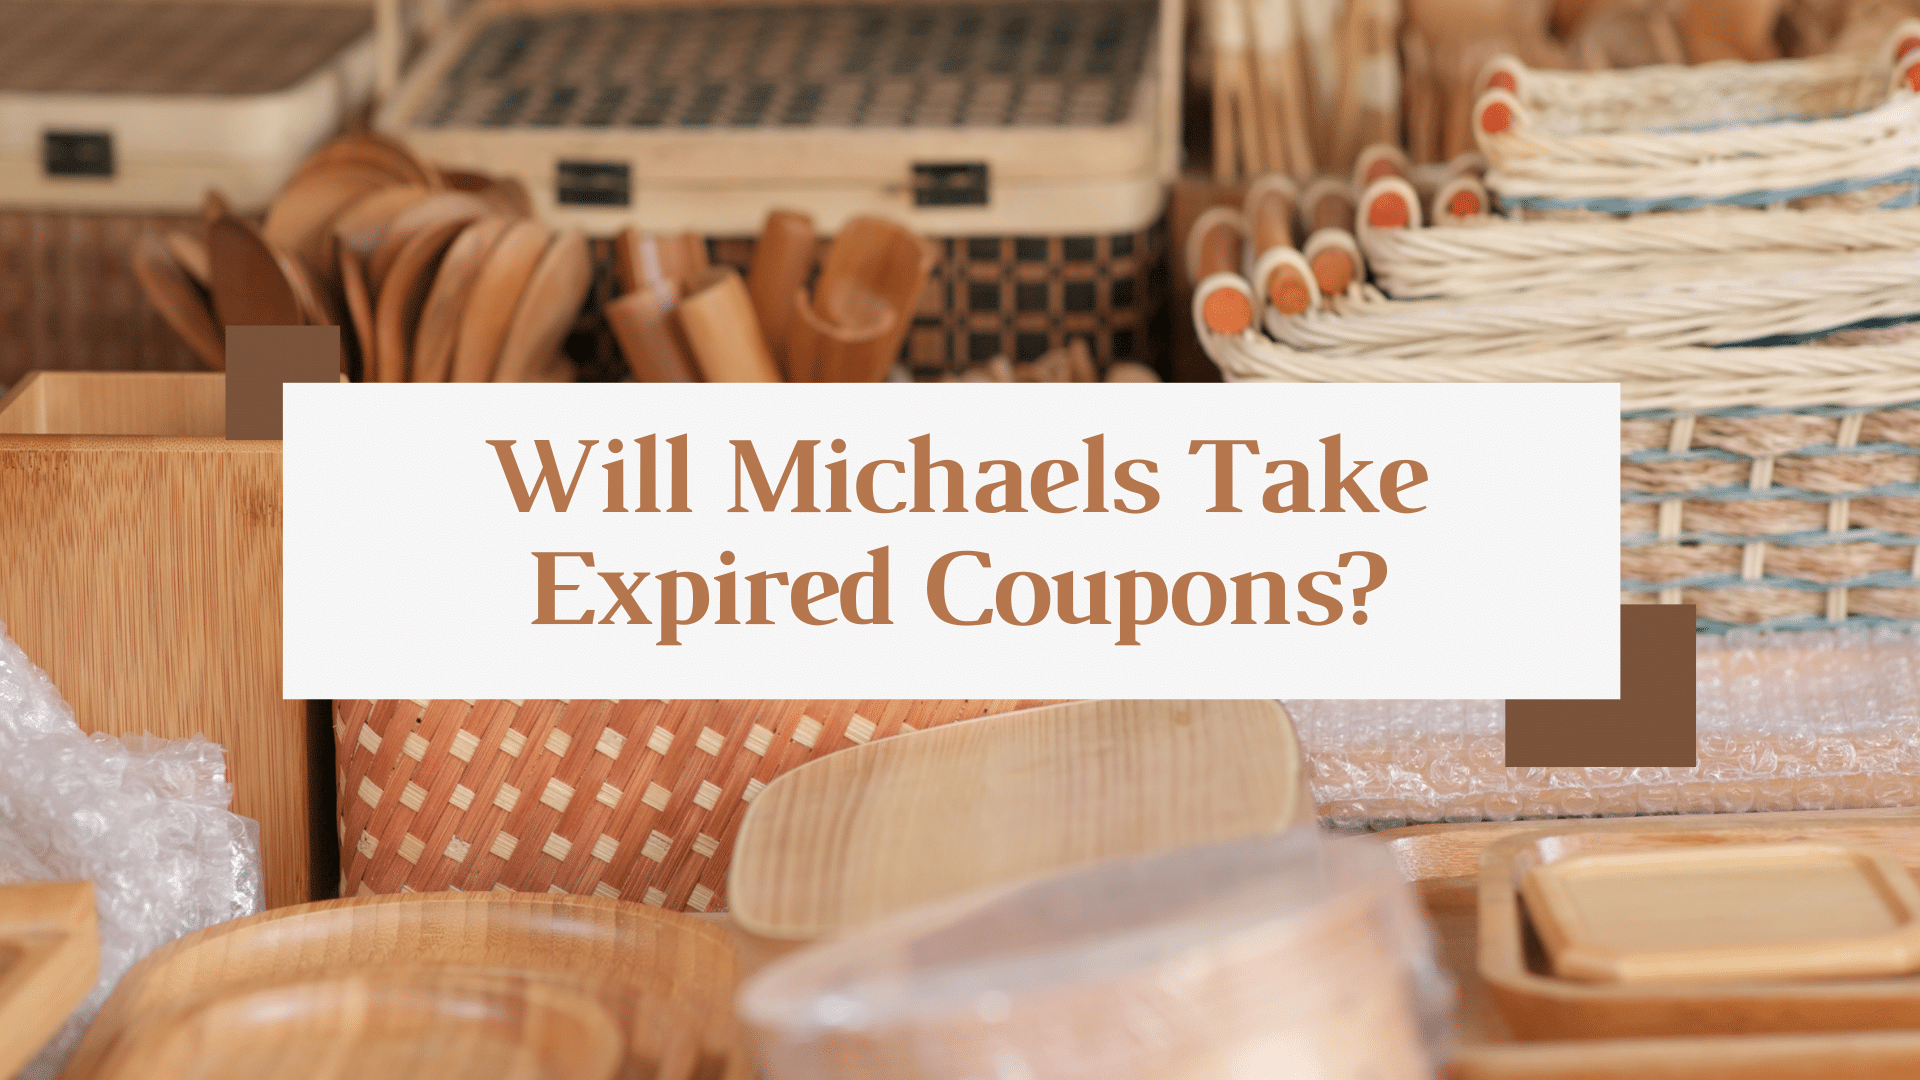 free coffee coupon: Michael coupons